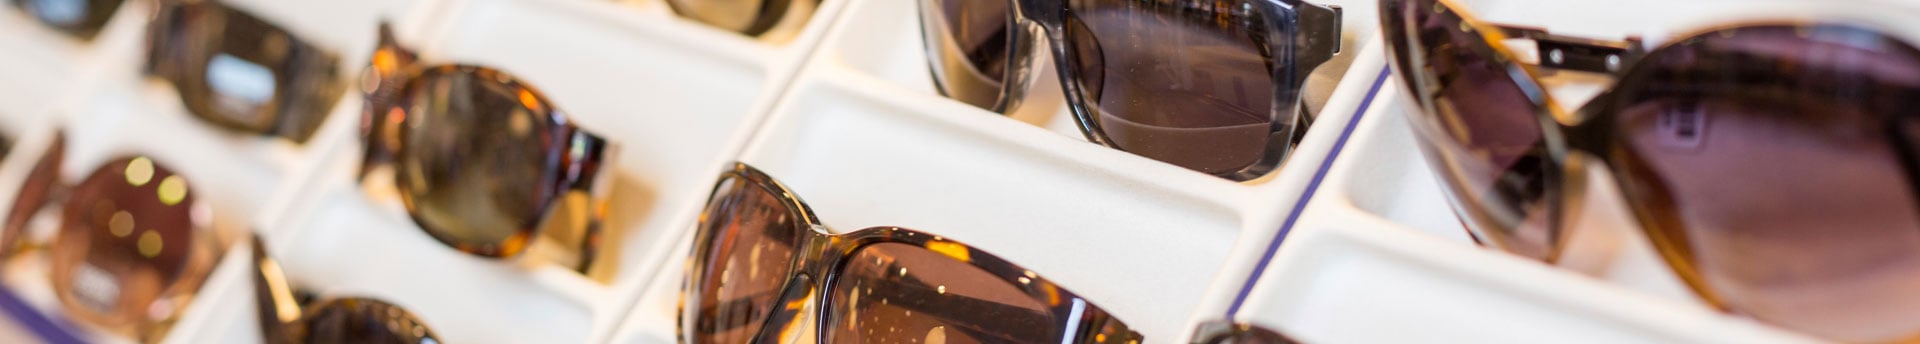 In the Eyewear market, tailored products are key” - Luxury Highlights